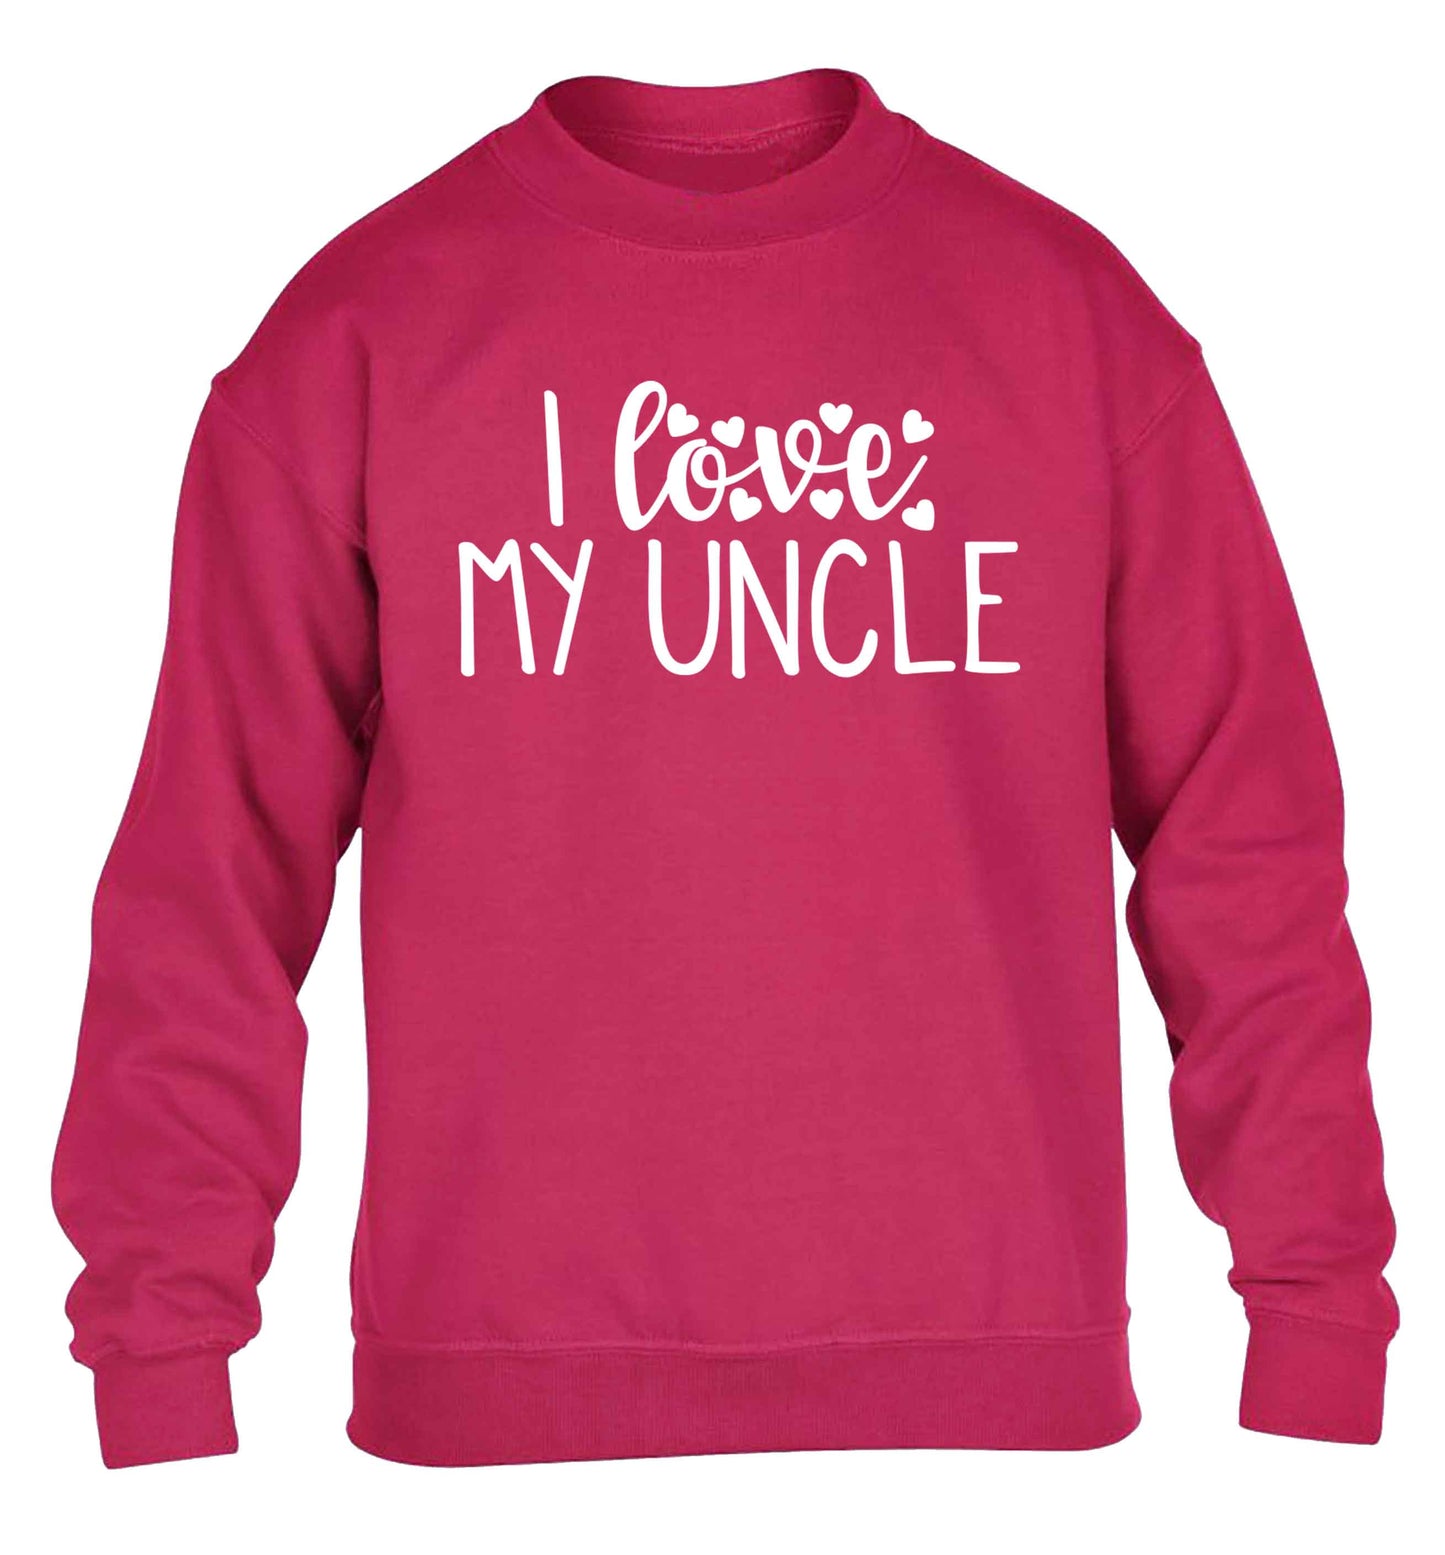 I love my uncle children's pink sweater 12-13 Years